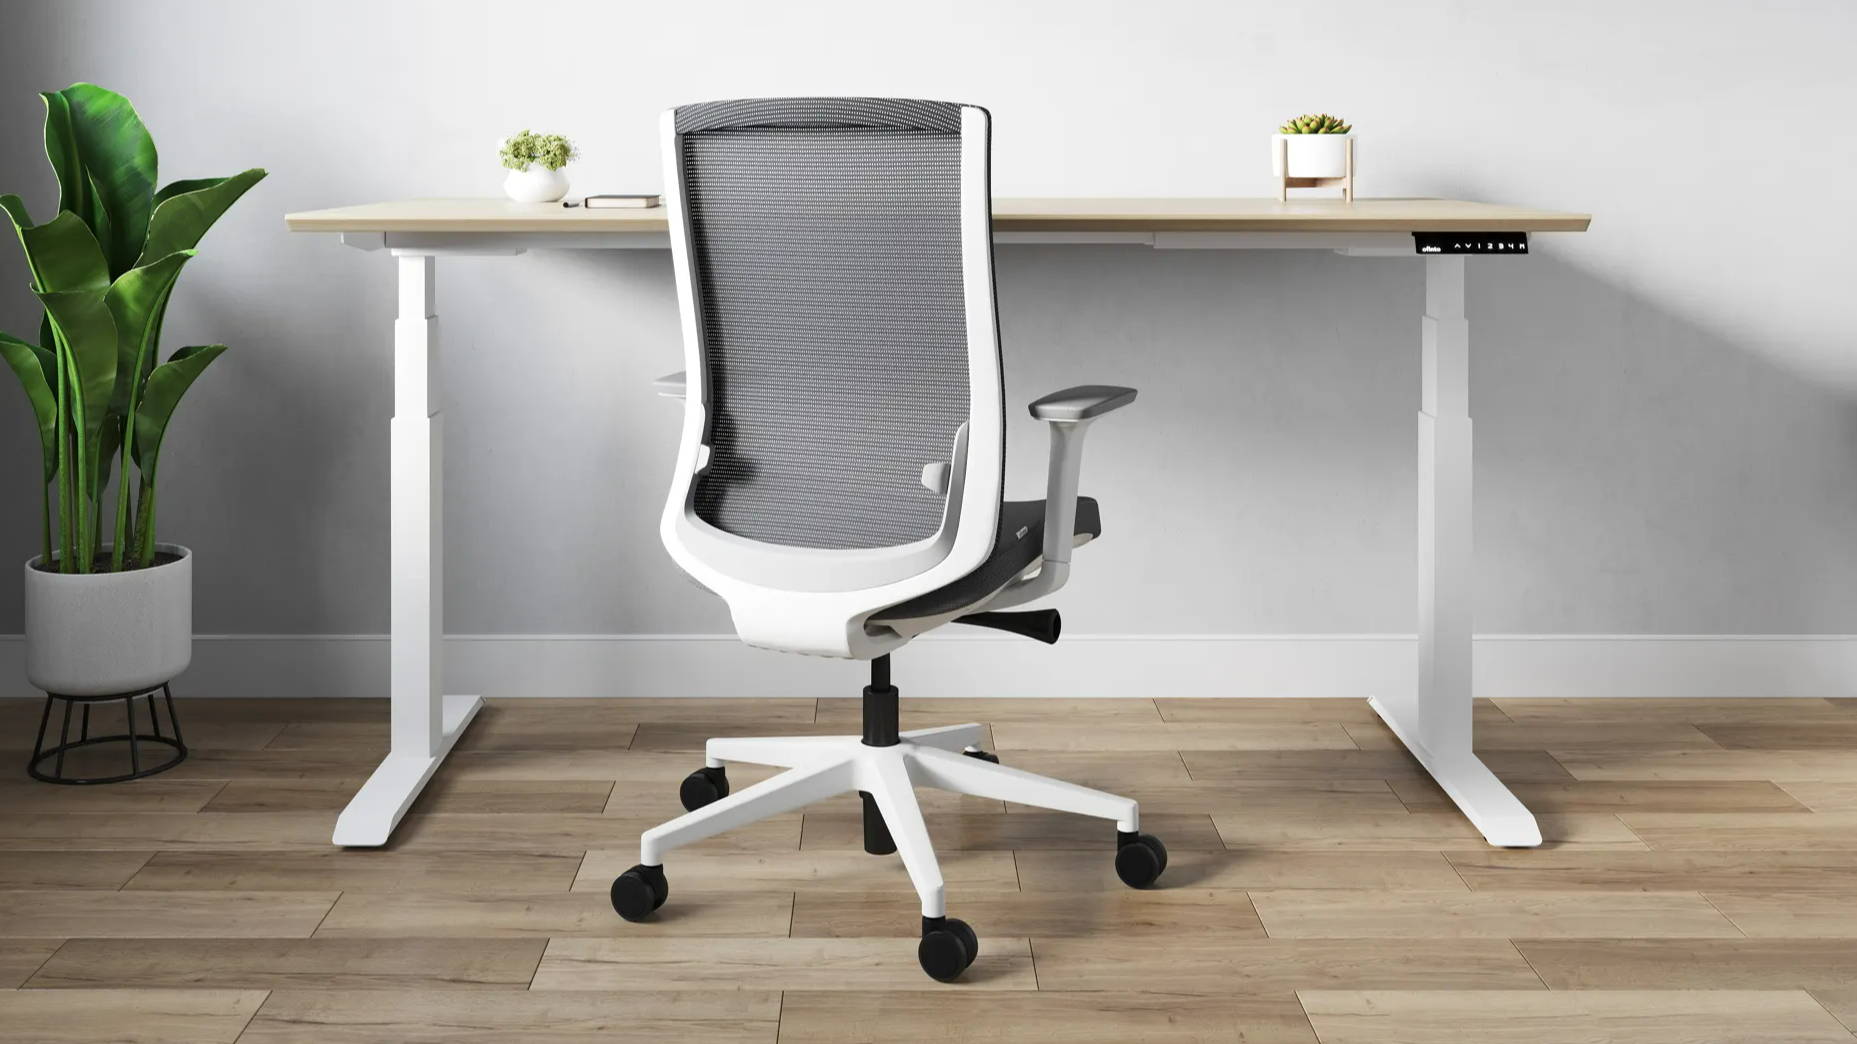 The ergonomic office chair Ergo white in a Home Office